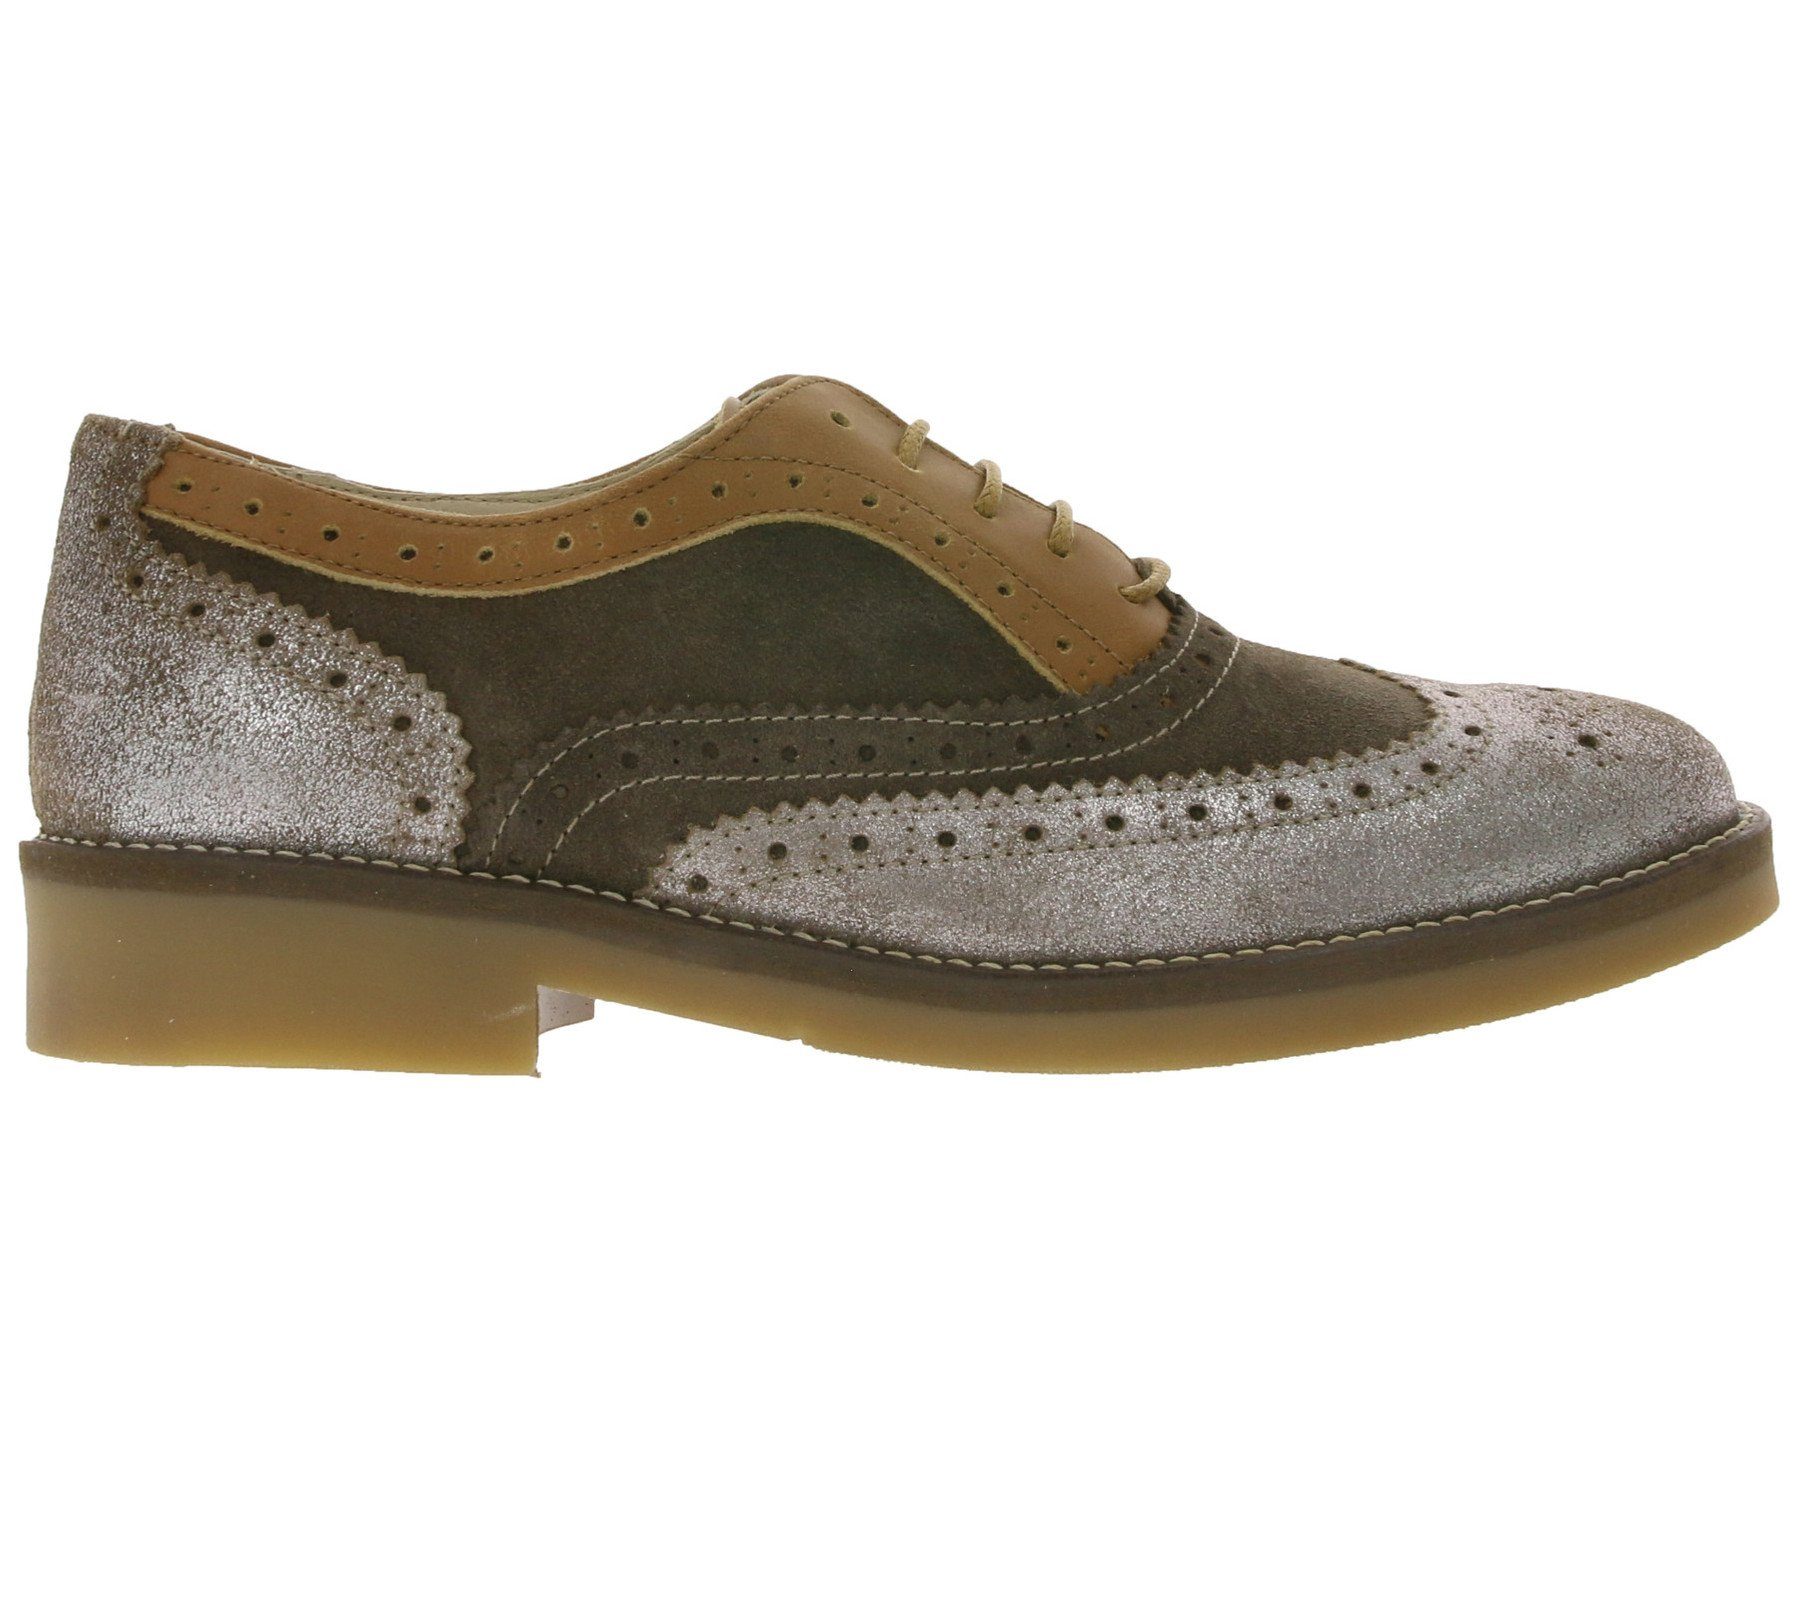 Mio Loafers Budapester Gr 37 Schuhe Businessschuhe Budapester 